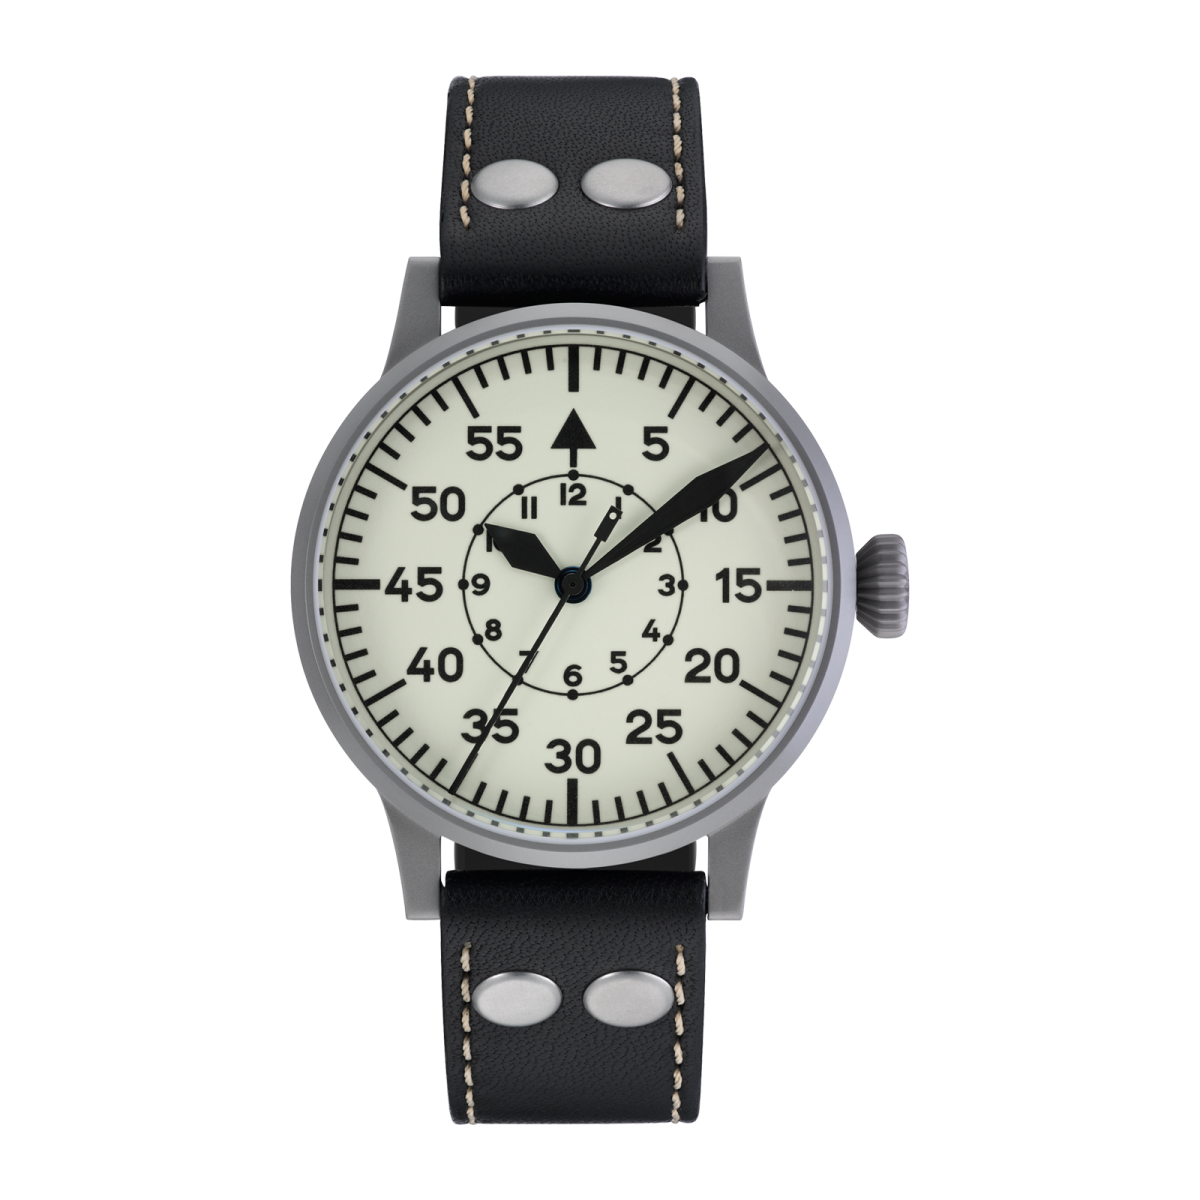 Taco, Wein 42 Pilot Watch, Made in Germany official distributor San Francisco